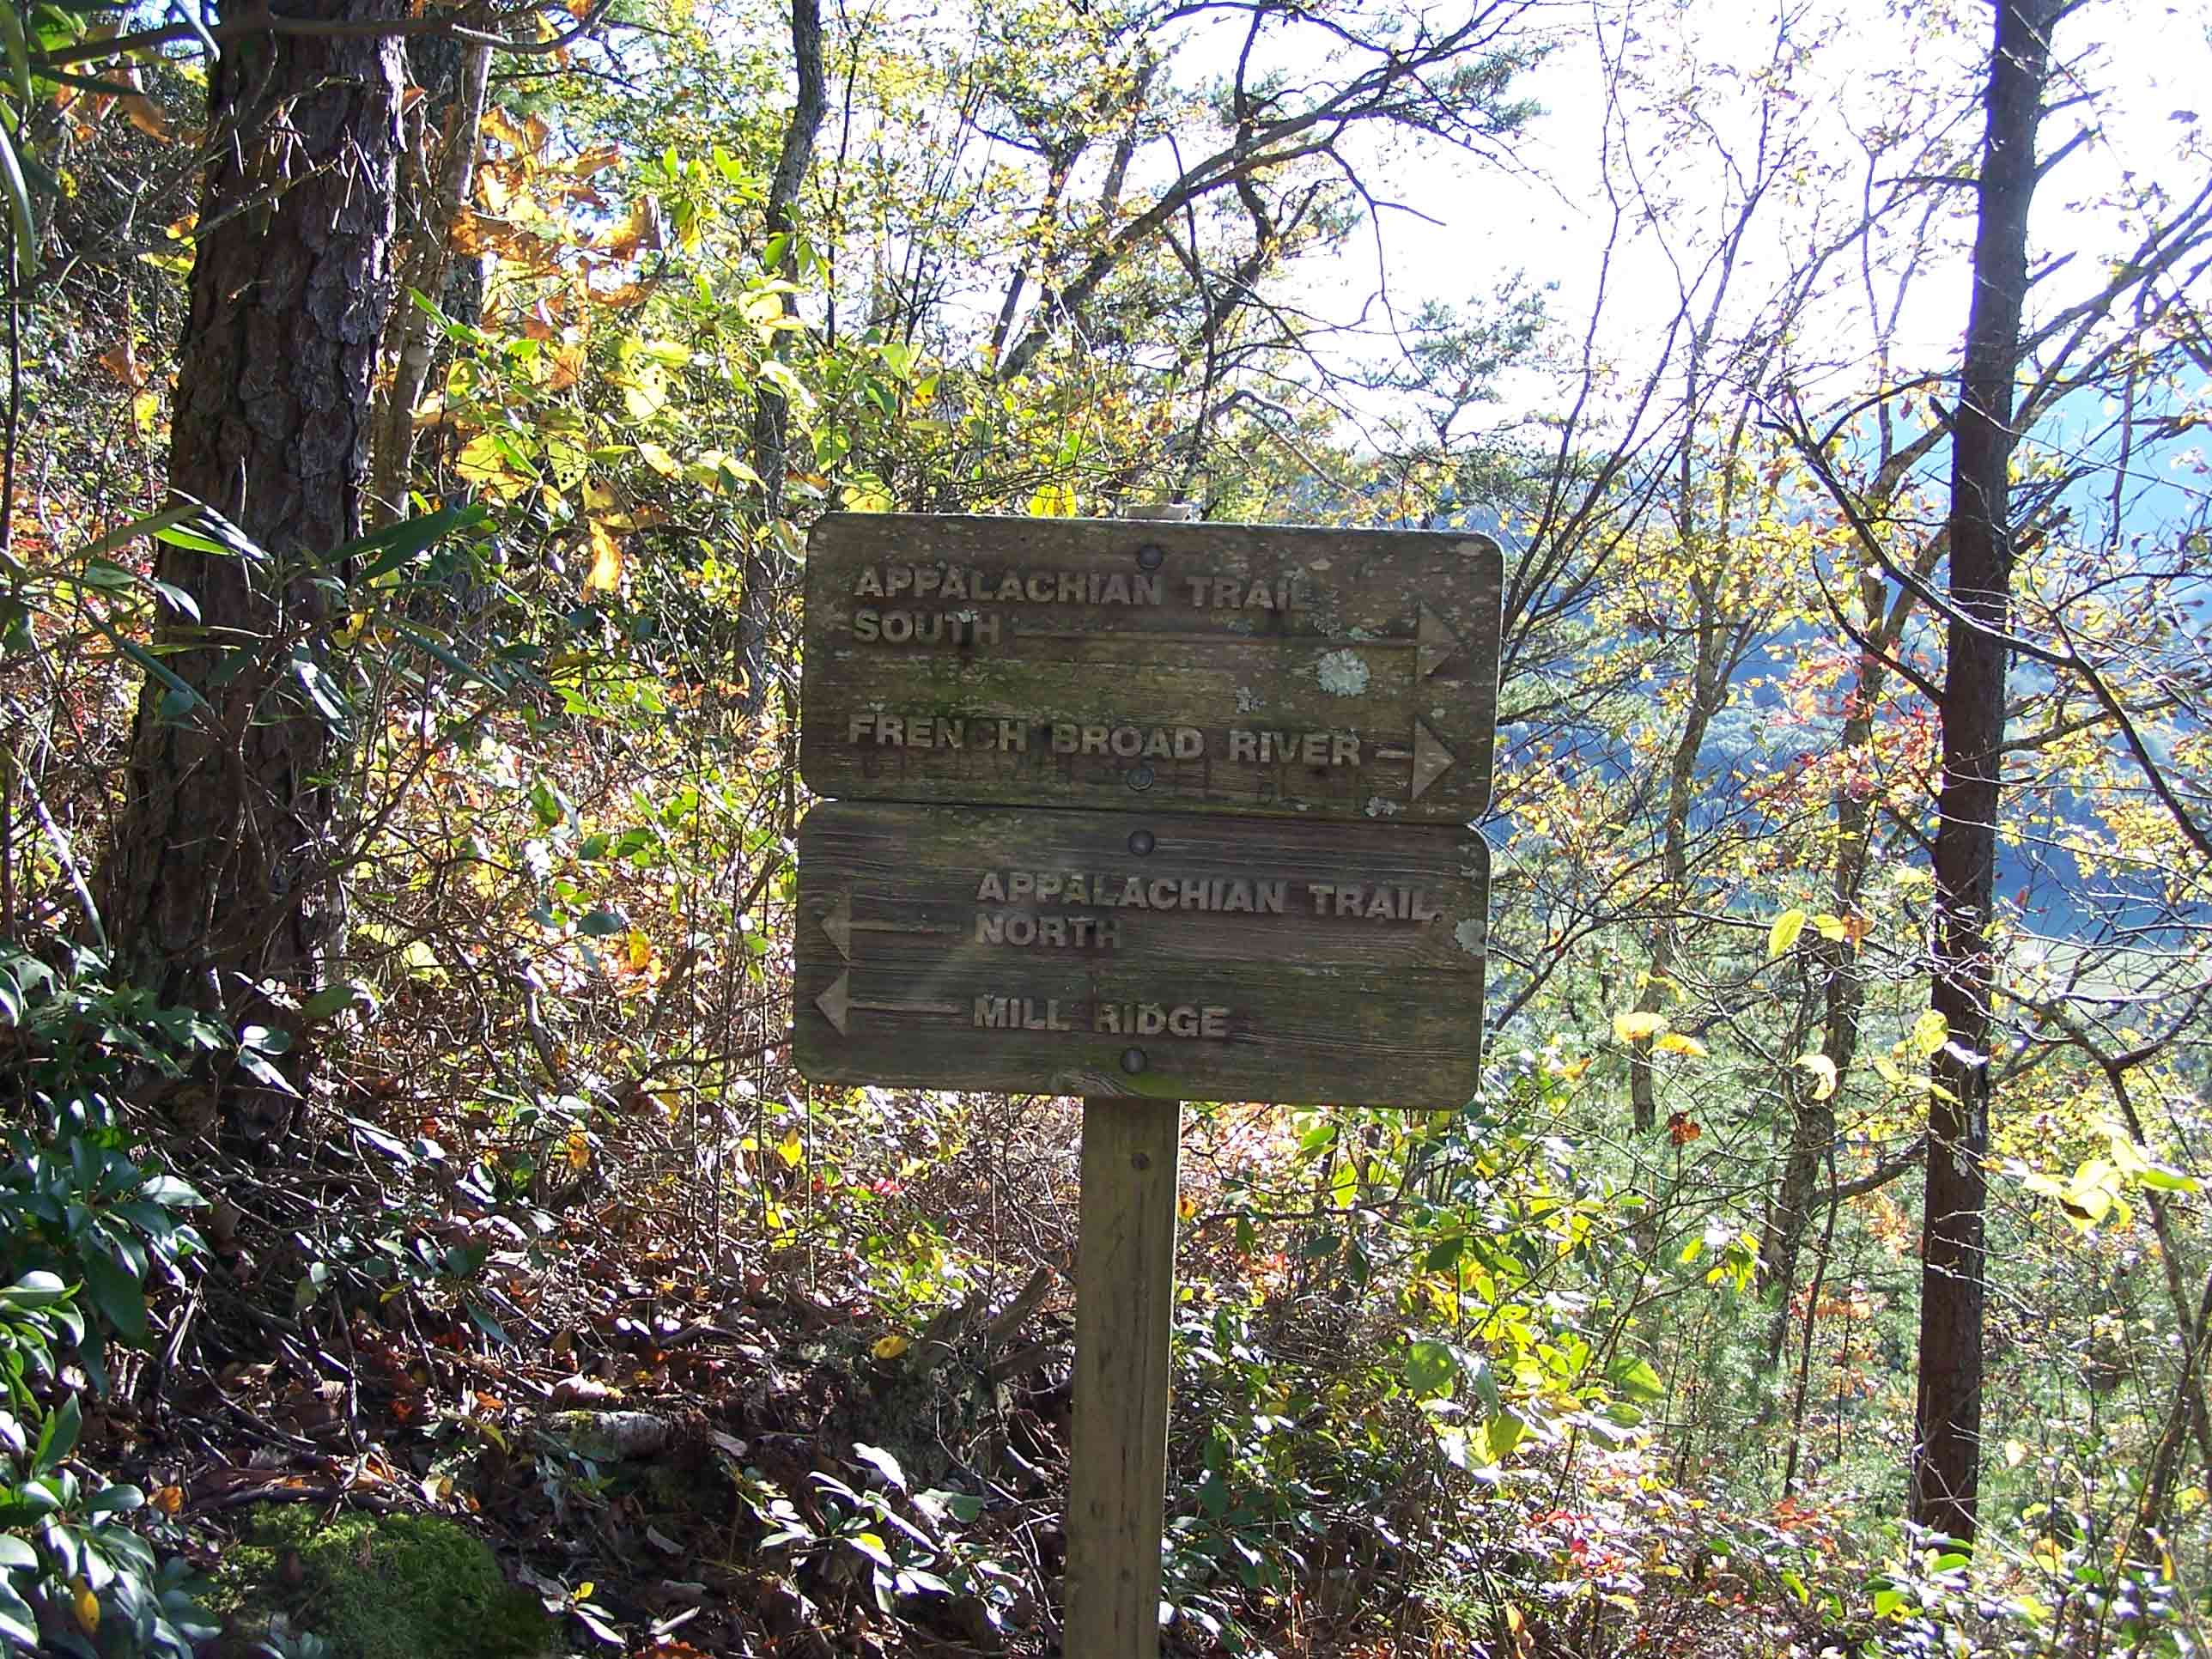 mm 13.0 - Trail sign near Lovers Leap Rock. Courtesy at@rohland.org